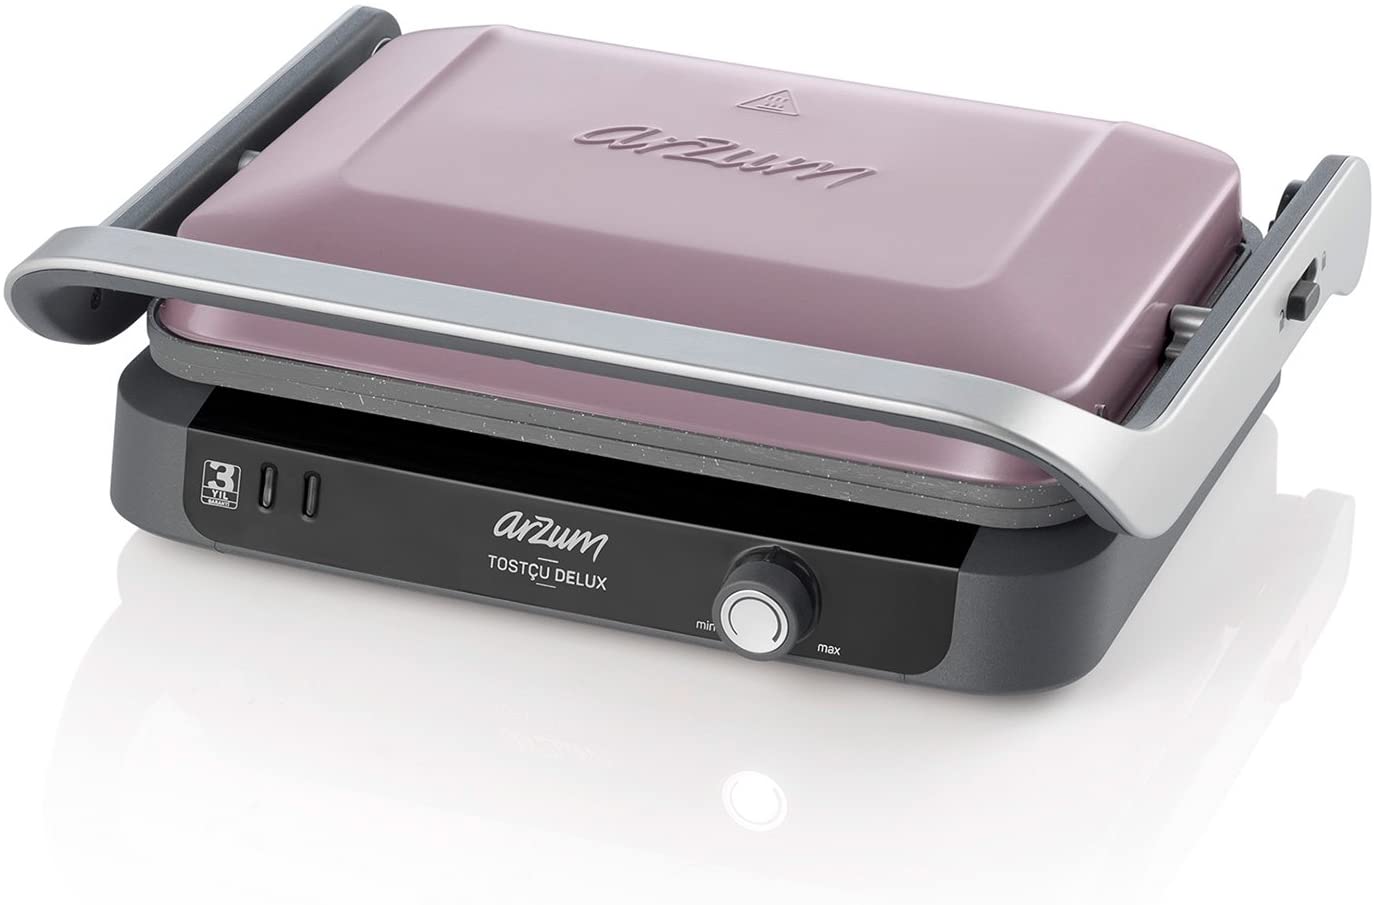 Arzum Deluxe Dreamline Tostcu Toaster Contact Grill Grill Toast Machine AR2028 Stainless Steel 1800W Colour: Dreamline Sandwich Maker